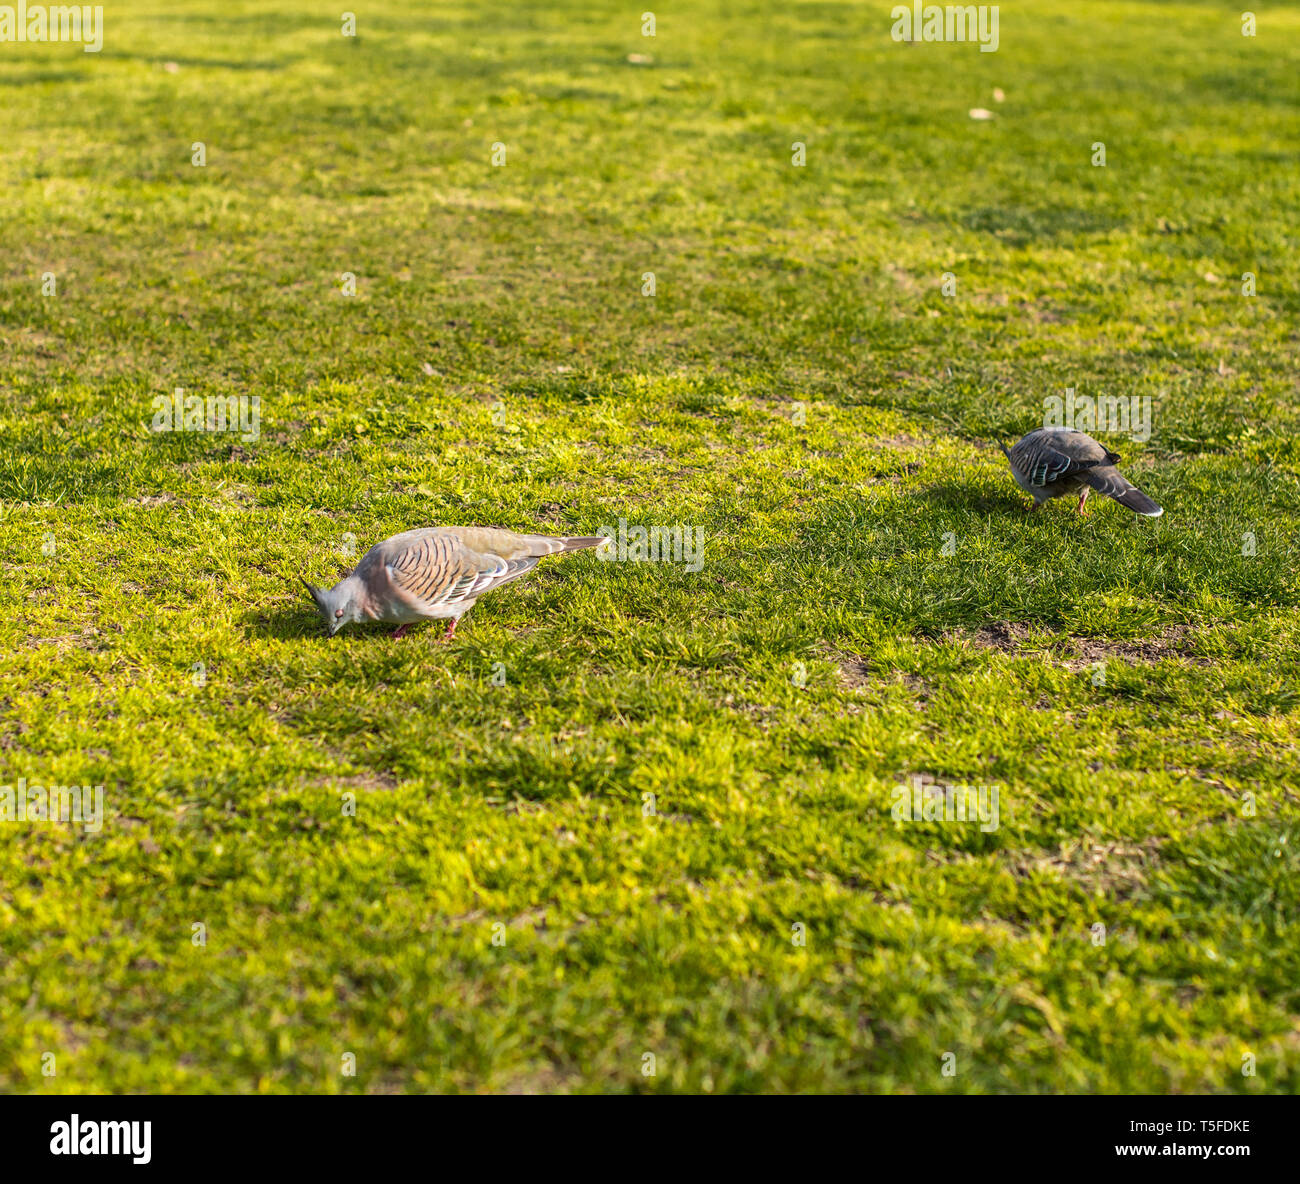 Two crested pigeons grazing on a grassy lawn Stock Photo